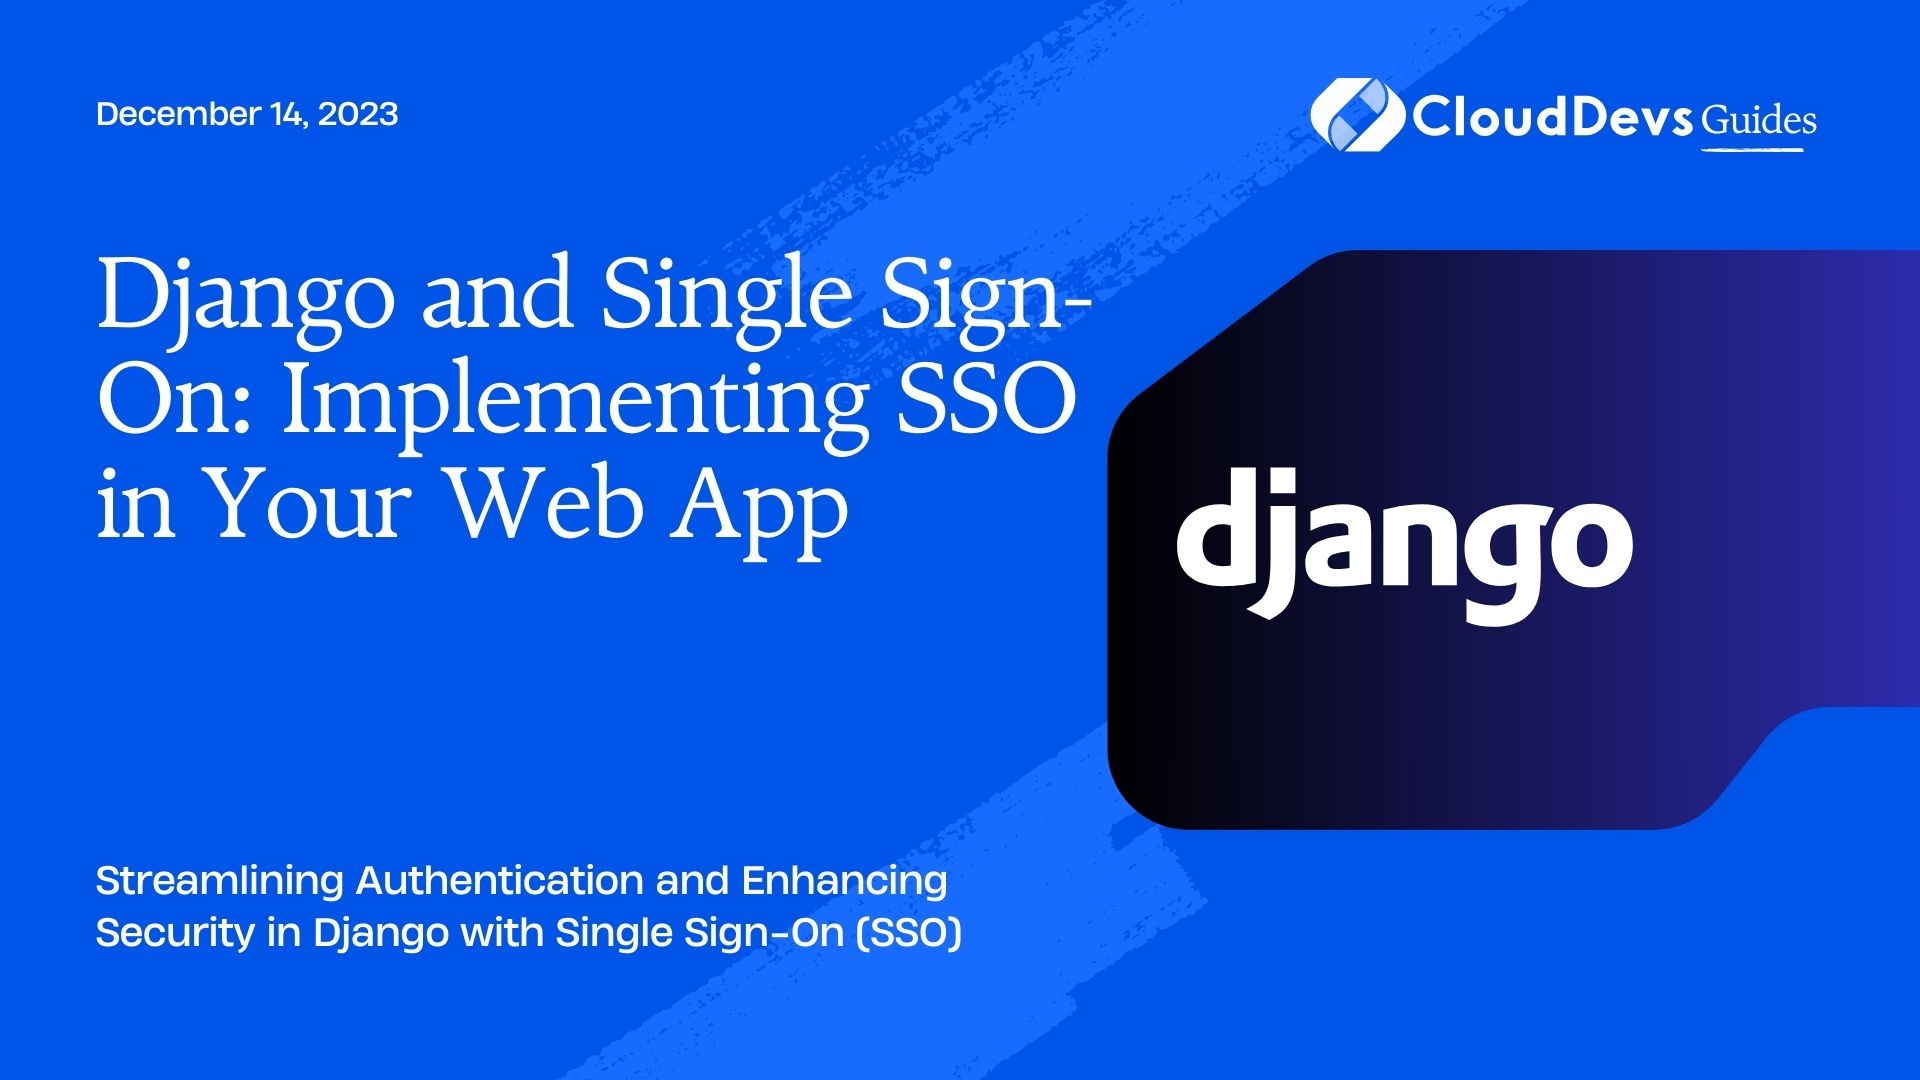 Django and Single Sign-On: Implementing SSO in Your Web App